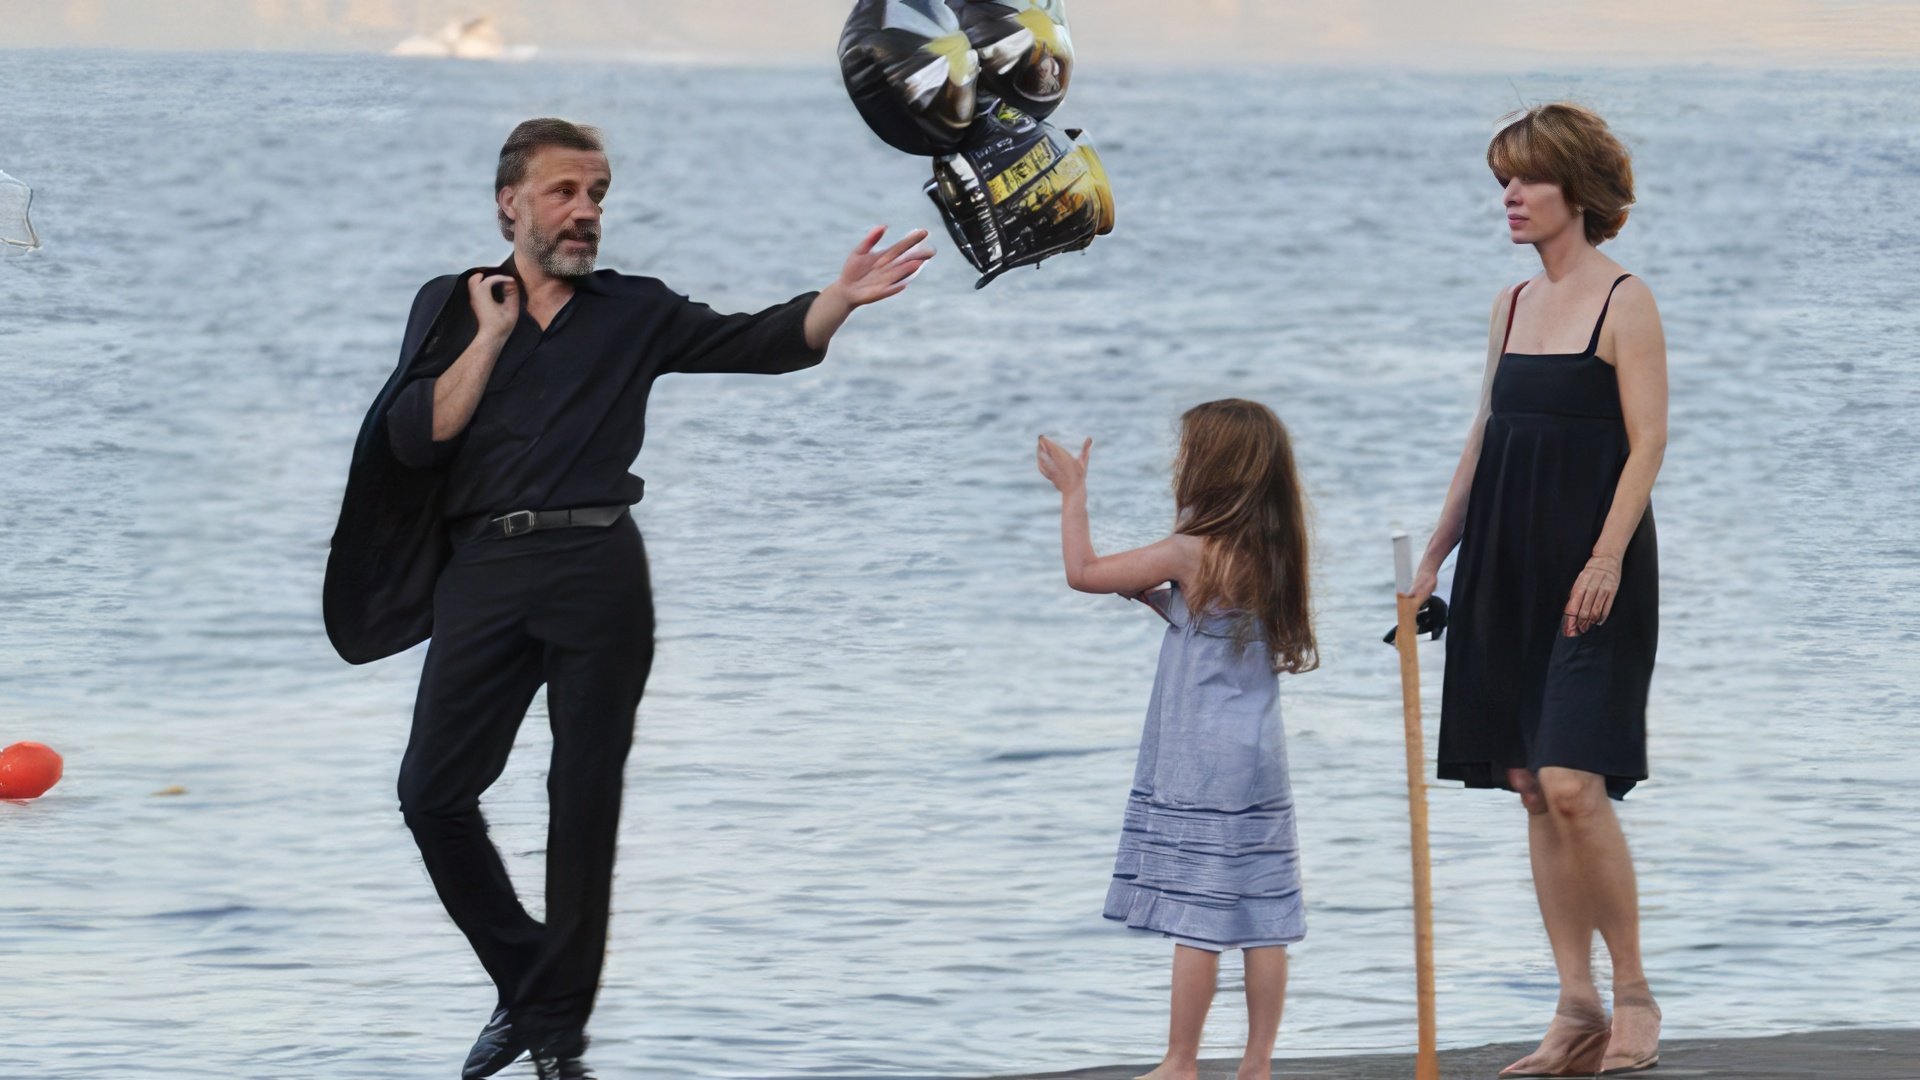 Christoph Waltz and family